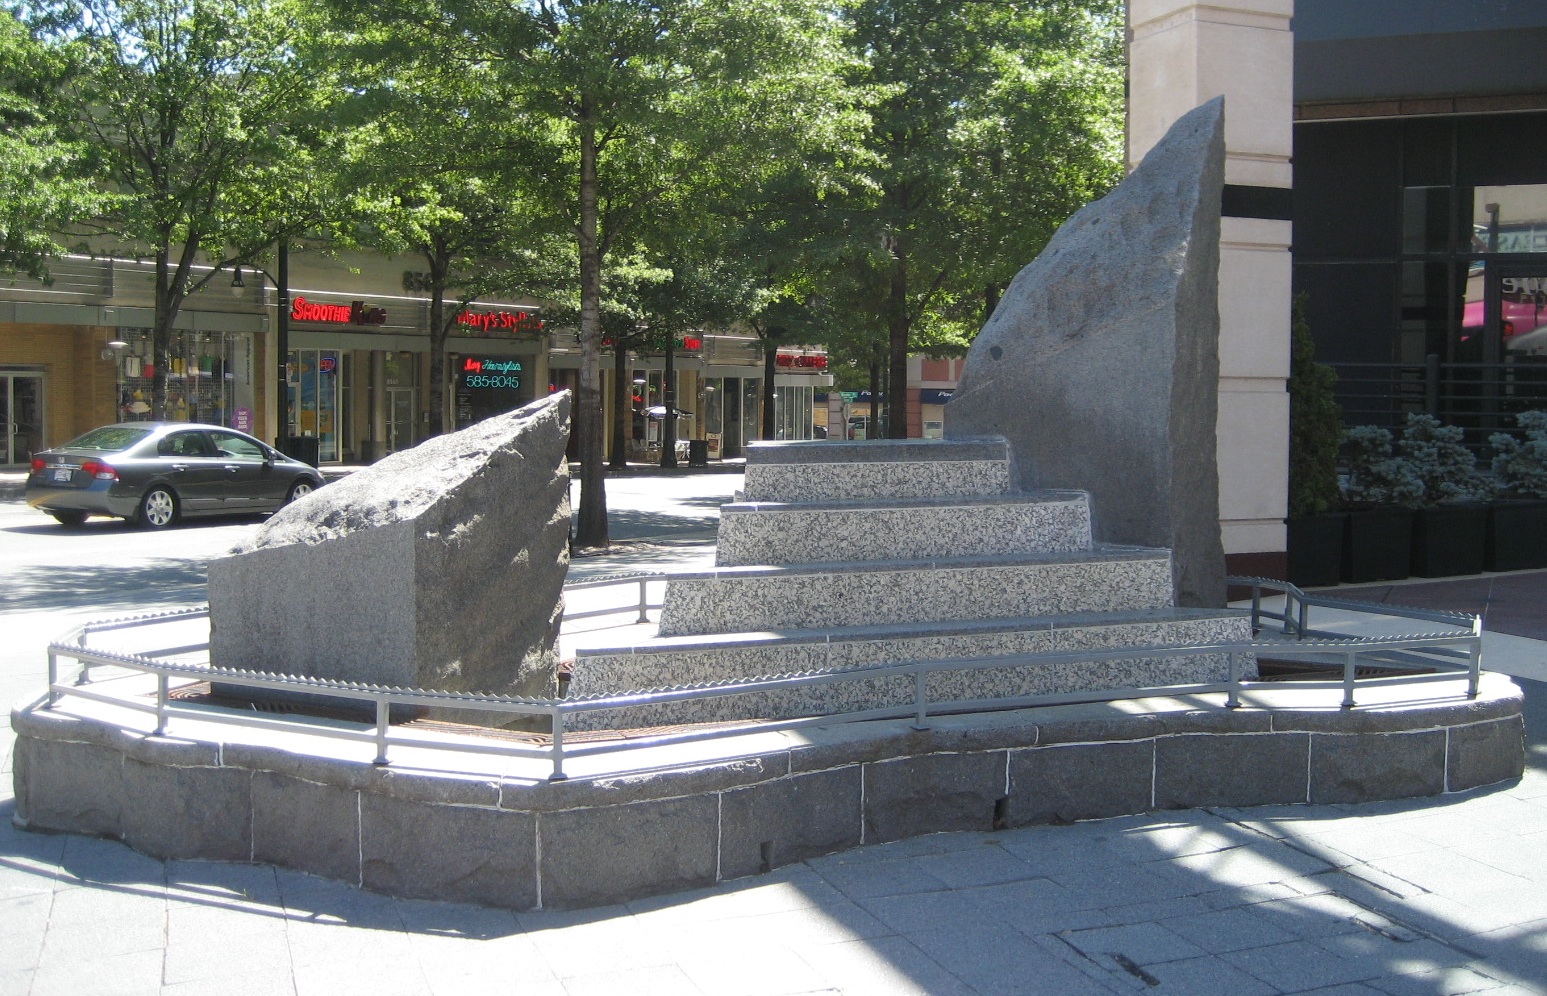 "City Place Bench" by Richard Hansen, 1992; 8661 Colesville Road and Fenton Street; Granite mica schist, blue pearl schist, aluminum; 8ft by18ft by 8ft.